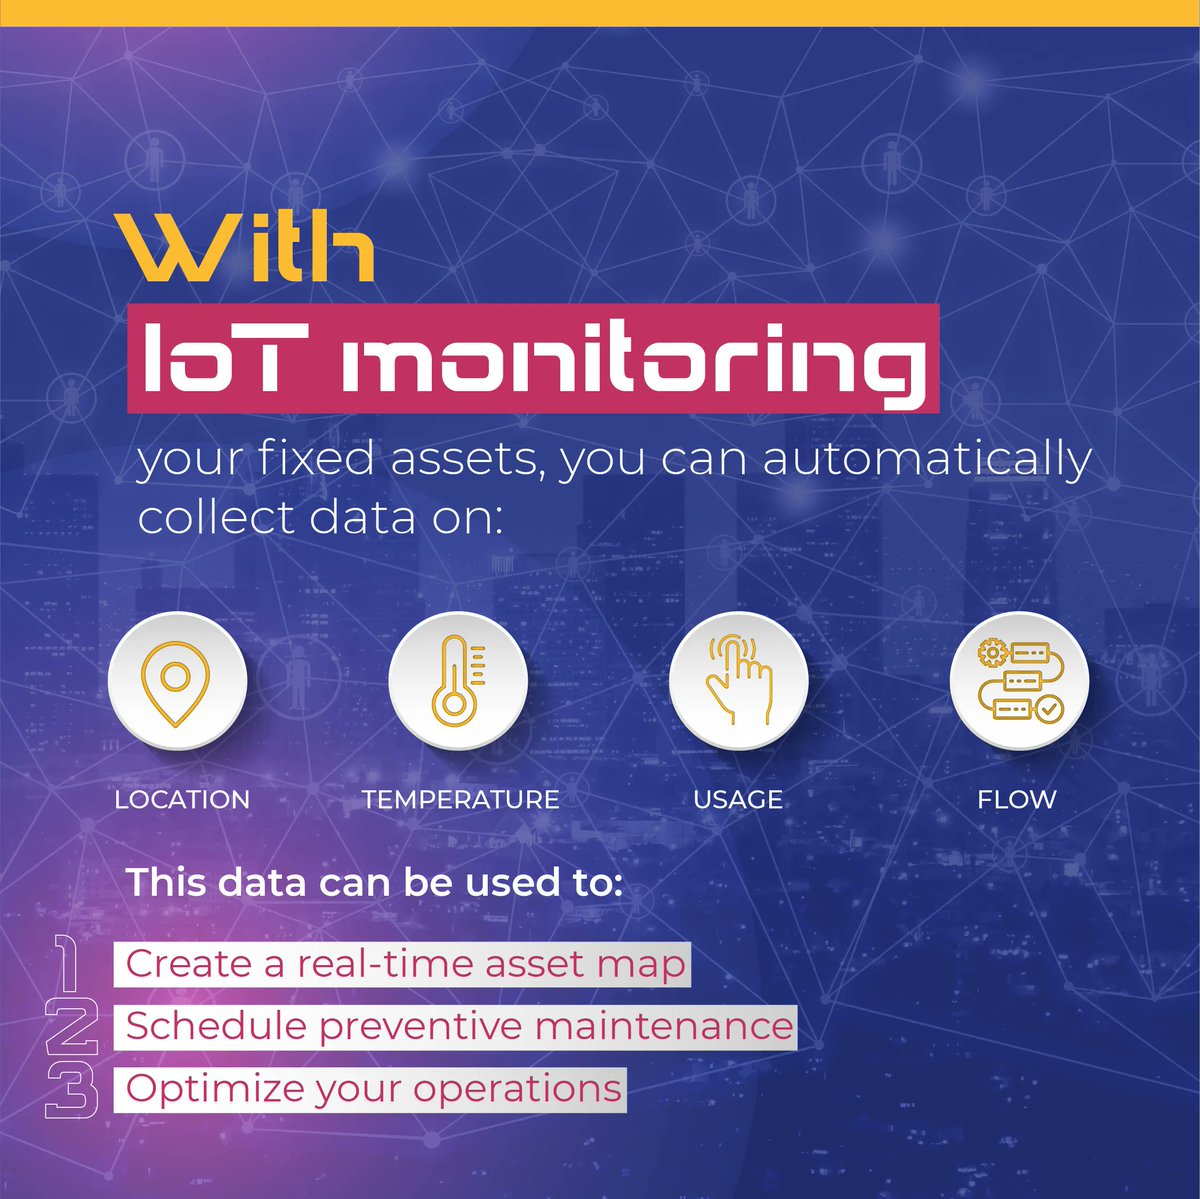 Why monitor your fixed assets with IoT? Go to buff.ly/3oglzlg for more info! #enterpriseassetmanagement #iot #internetofthings